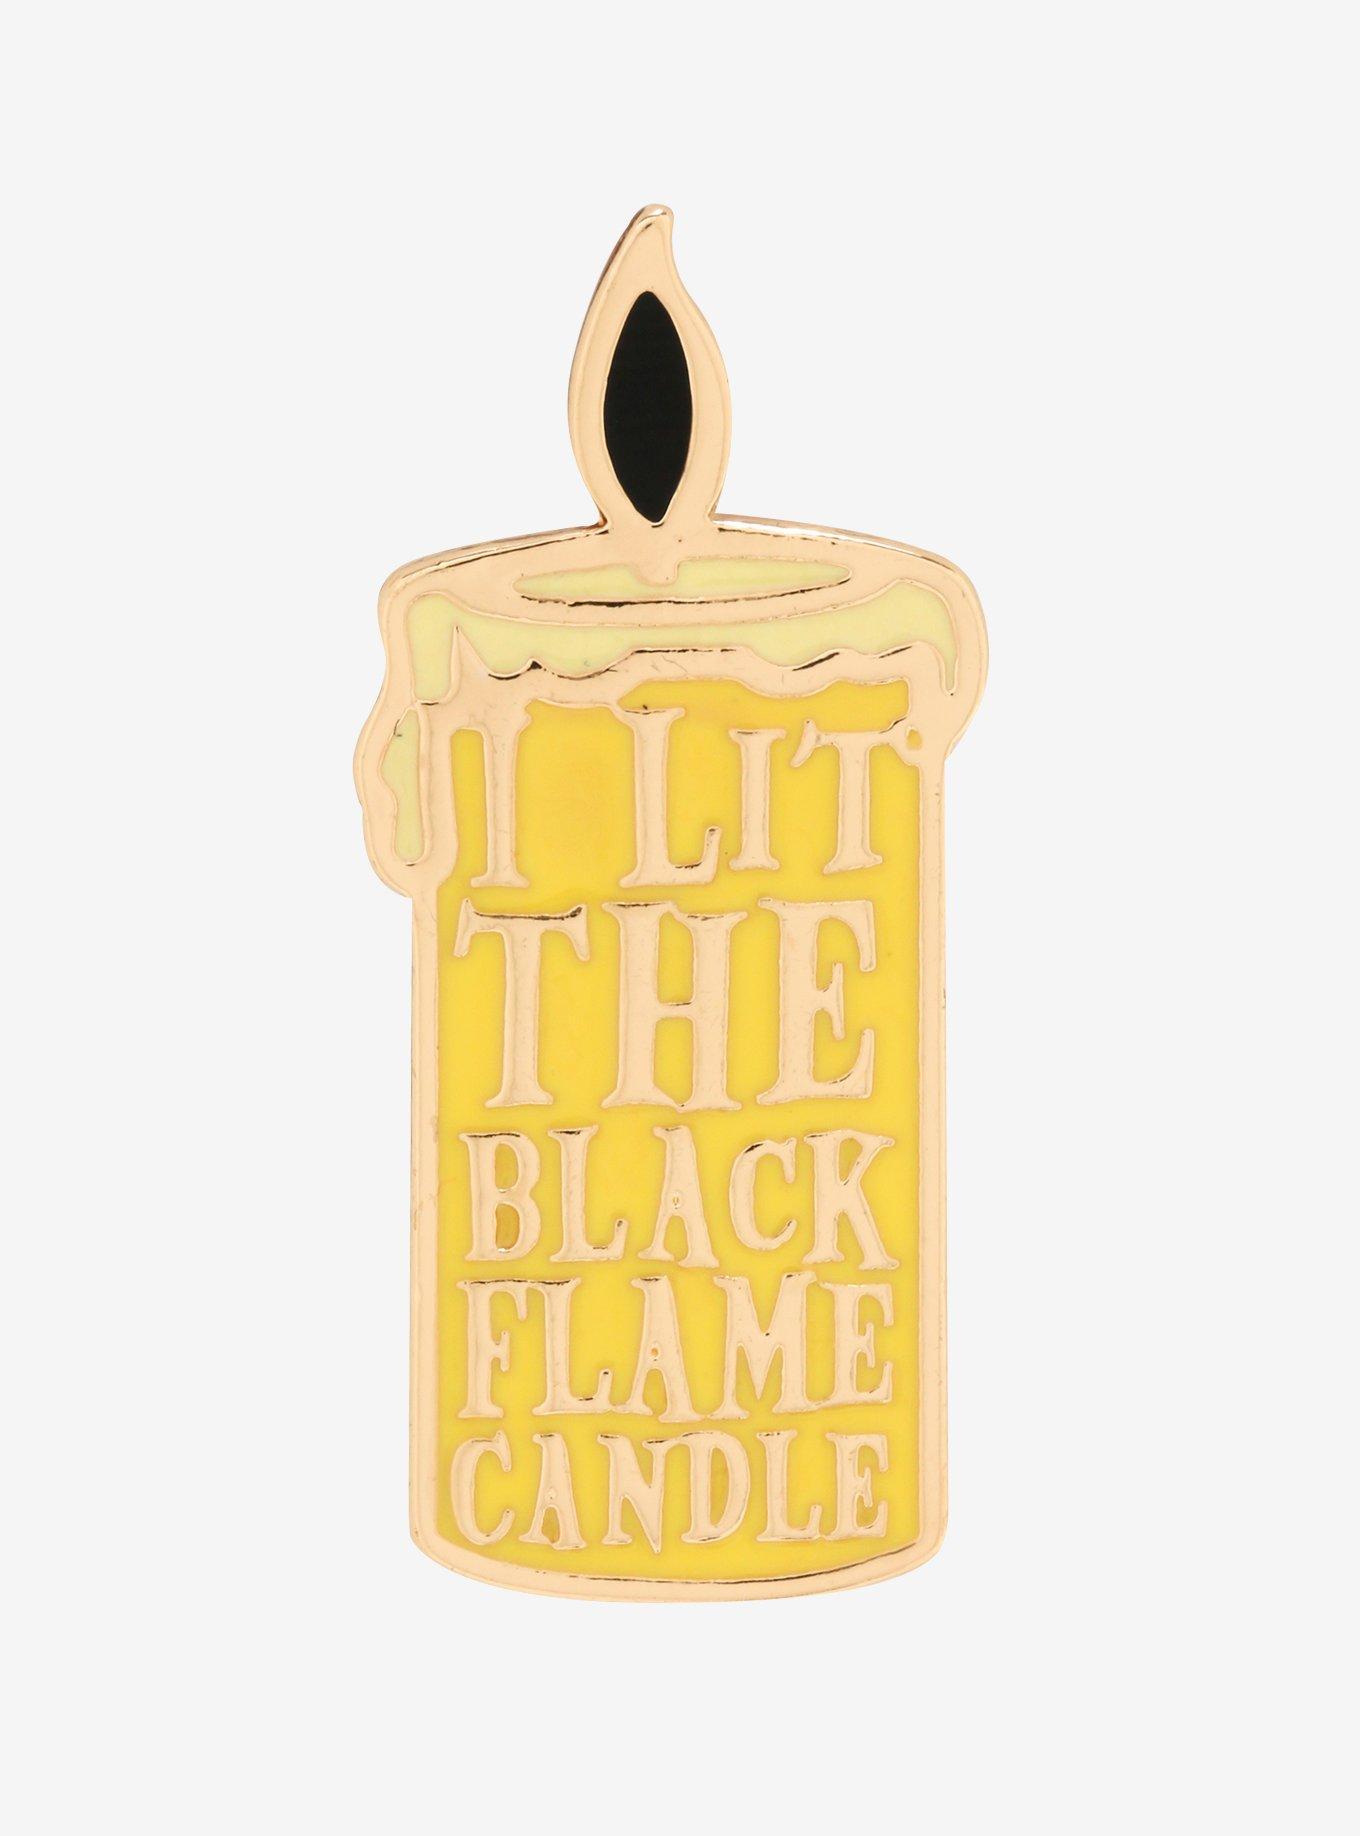 Disney Hocus Pocus Black Flame Candle Pin Enamel Pin LE Loungefly Box Lunch Hall